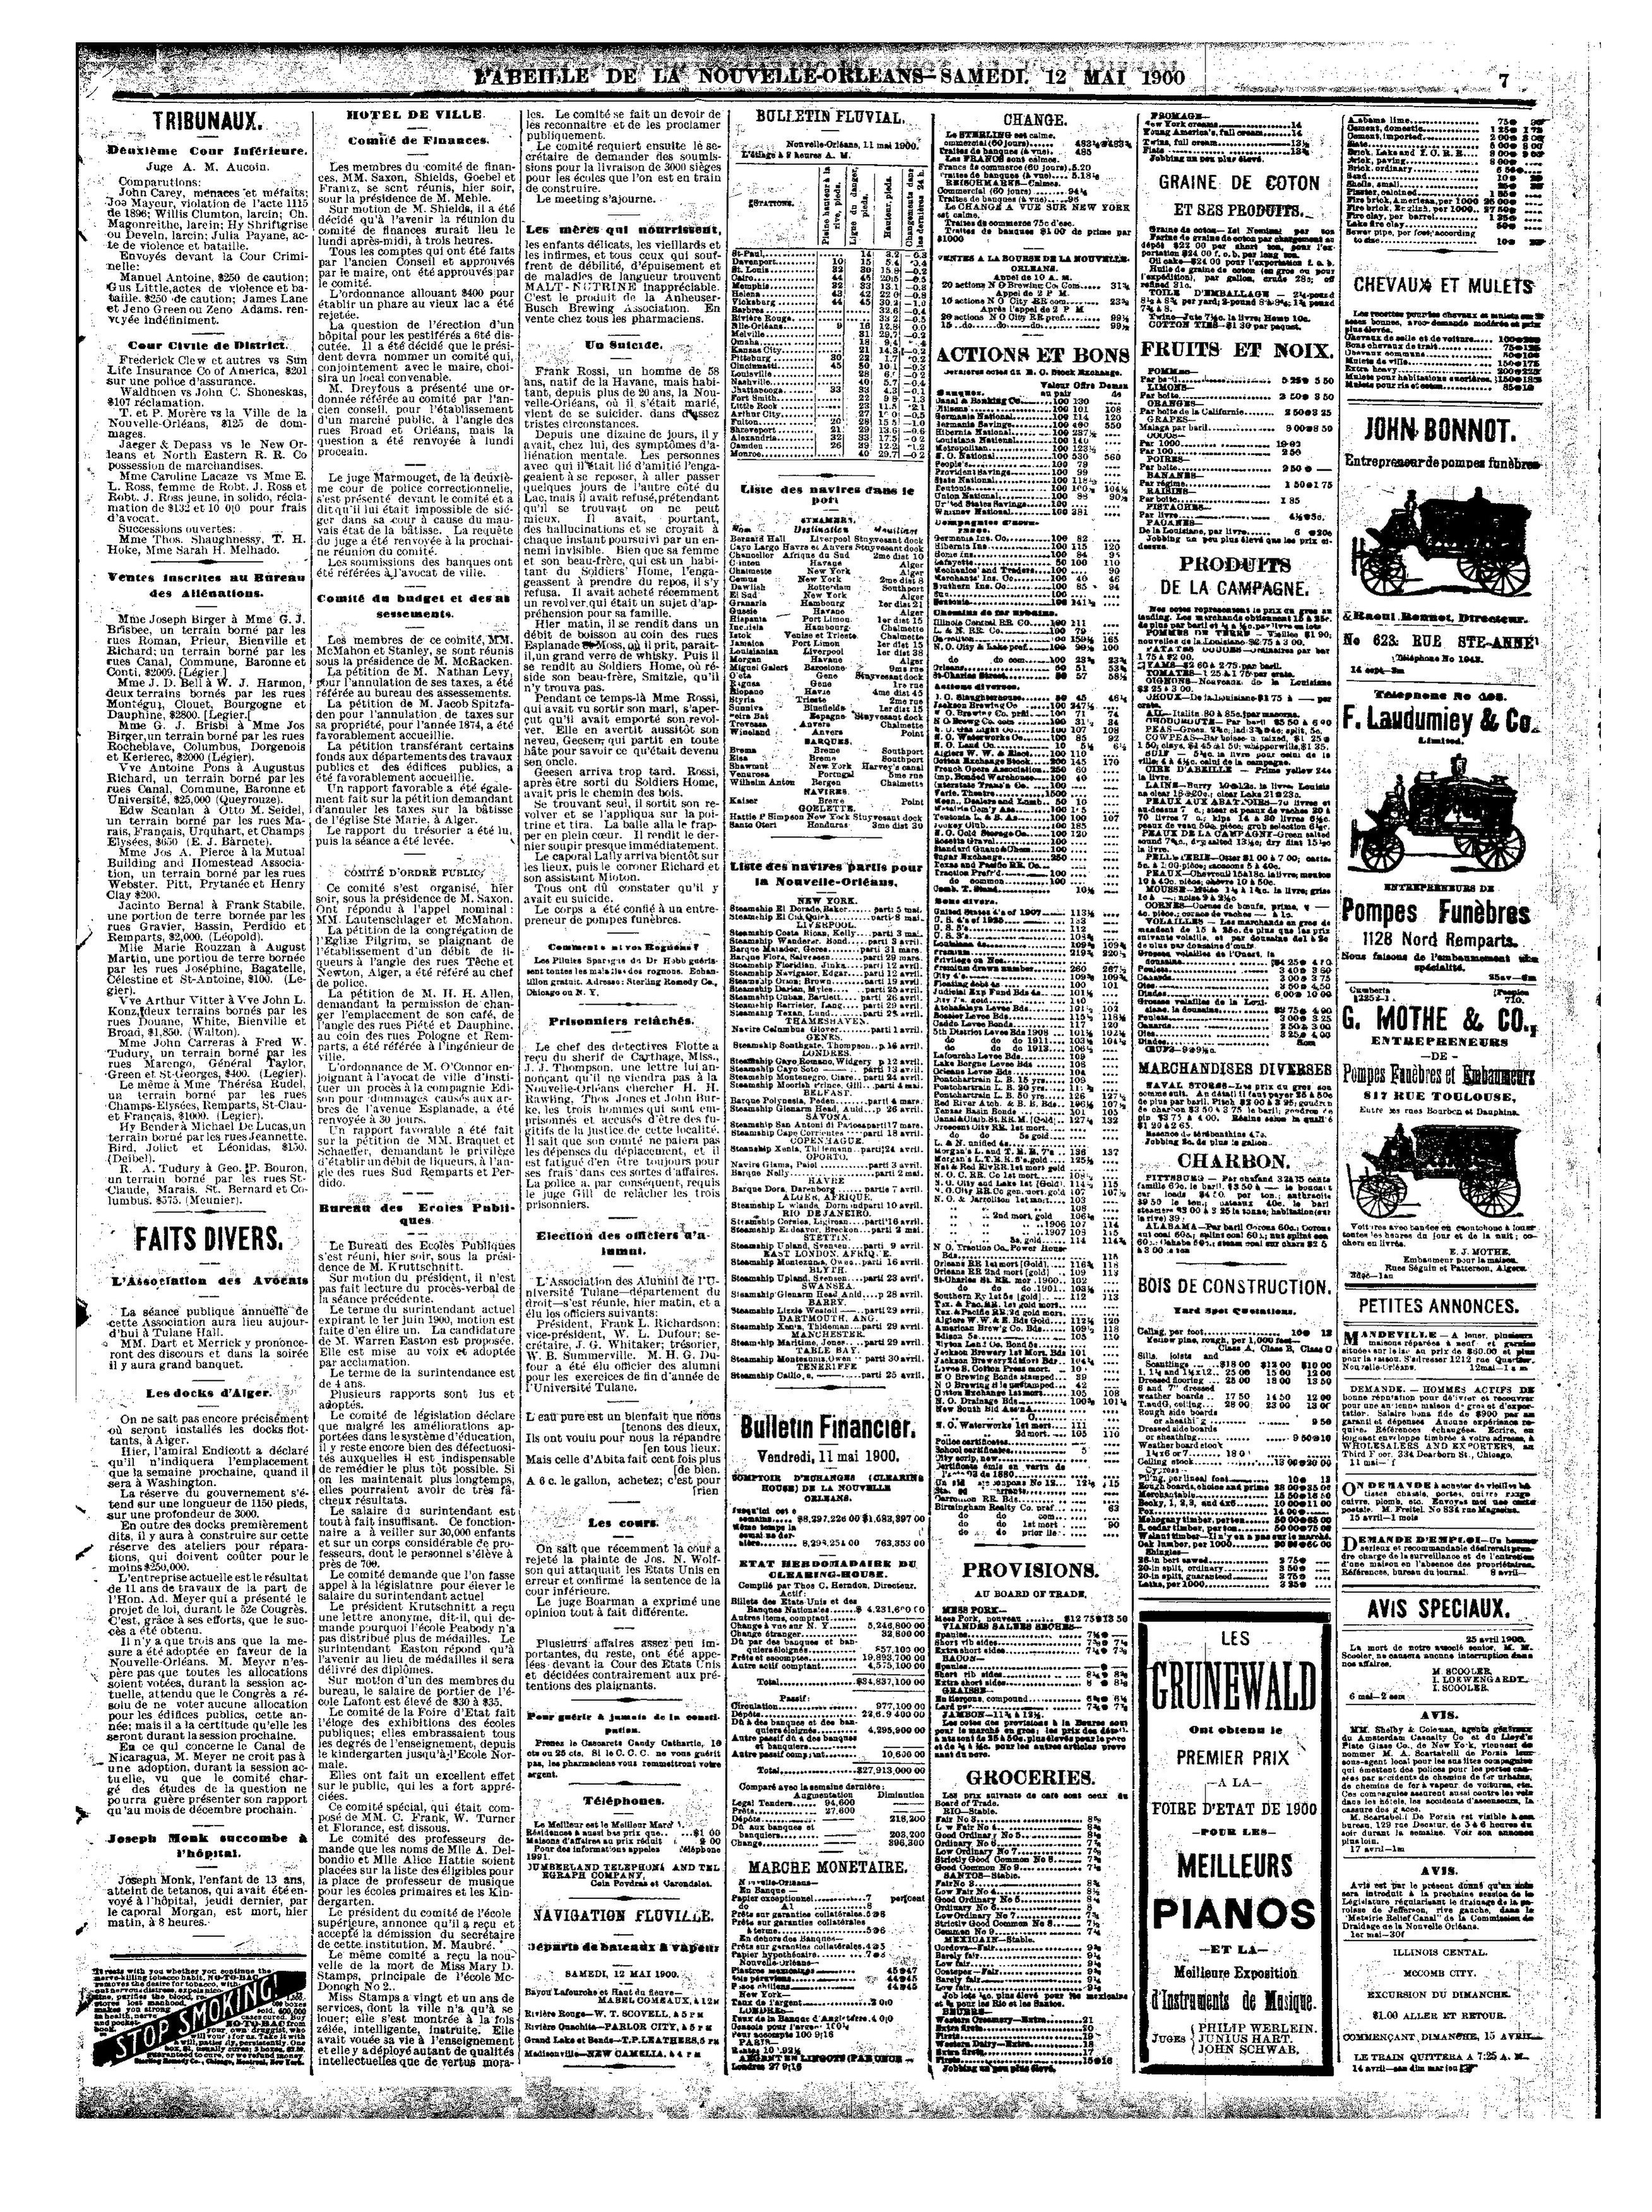 File The New Orleans Bee 1900 May 0092 Pdf Wikimedia Commons